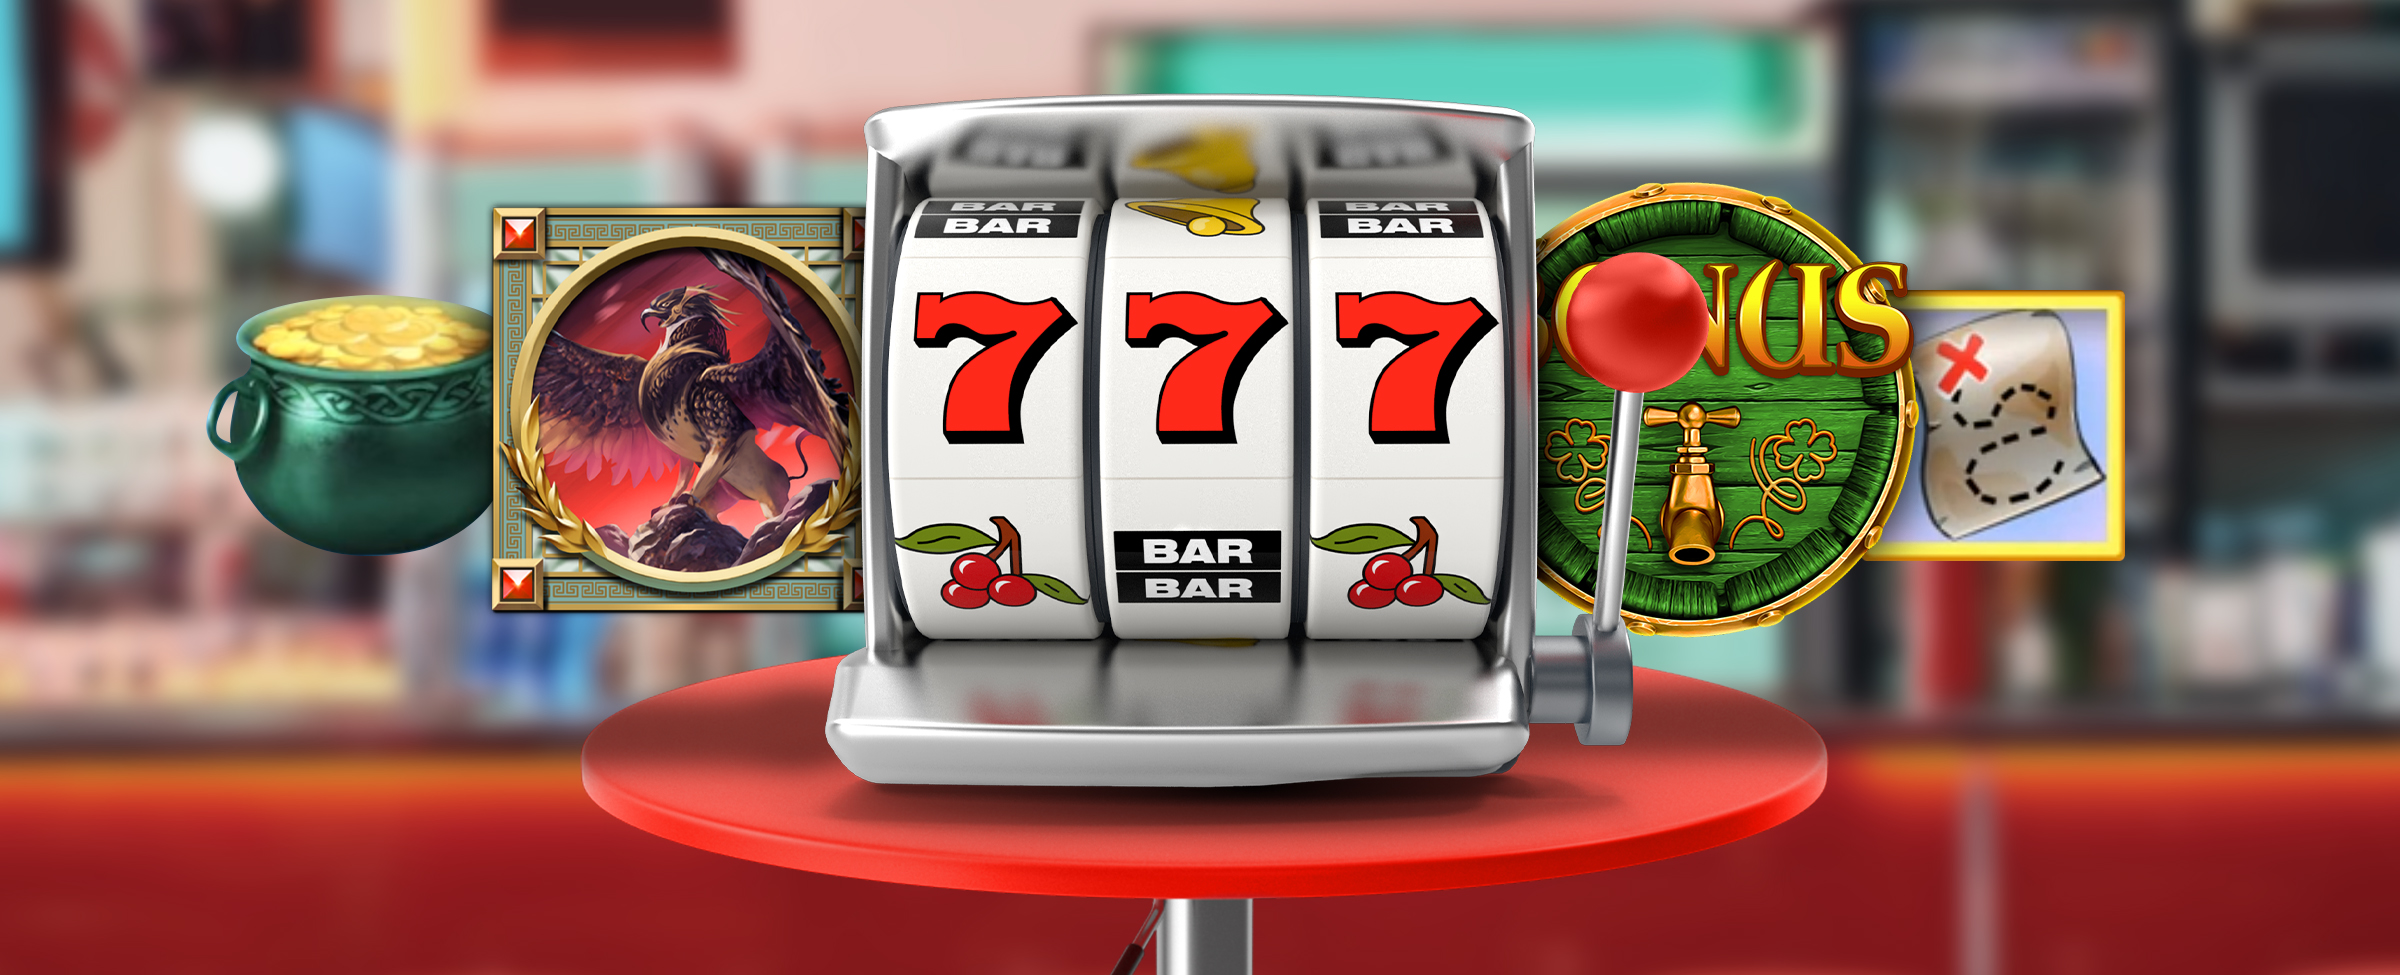 A 3D-animated old-school slot sits on a red diner’s table, while on either side, various game symbols from Cafe Casino’s online slot games are shown, including a green pot filled with gold, an eagle, a beer keg, and a treasure map. In the background is an out-of-focus American-style diner.